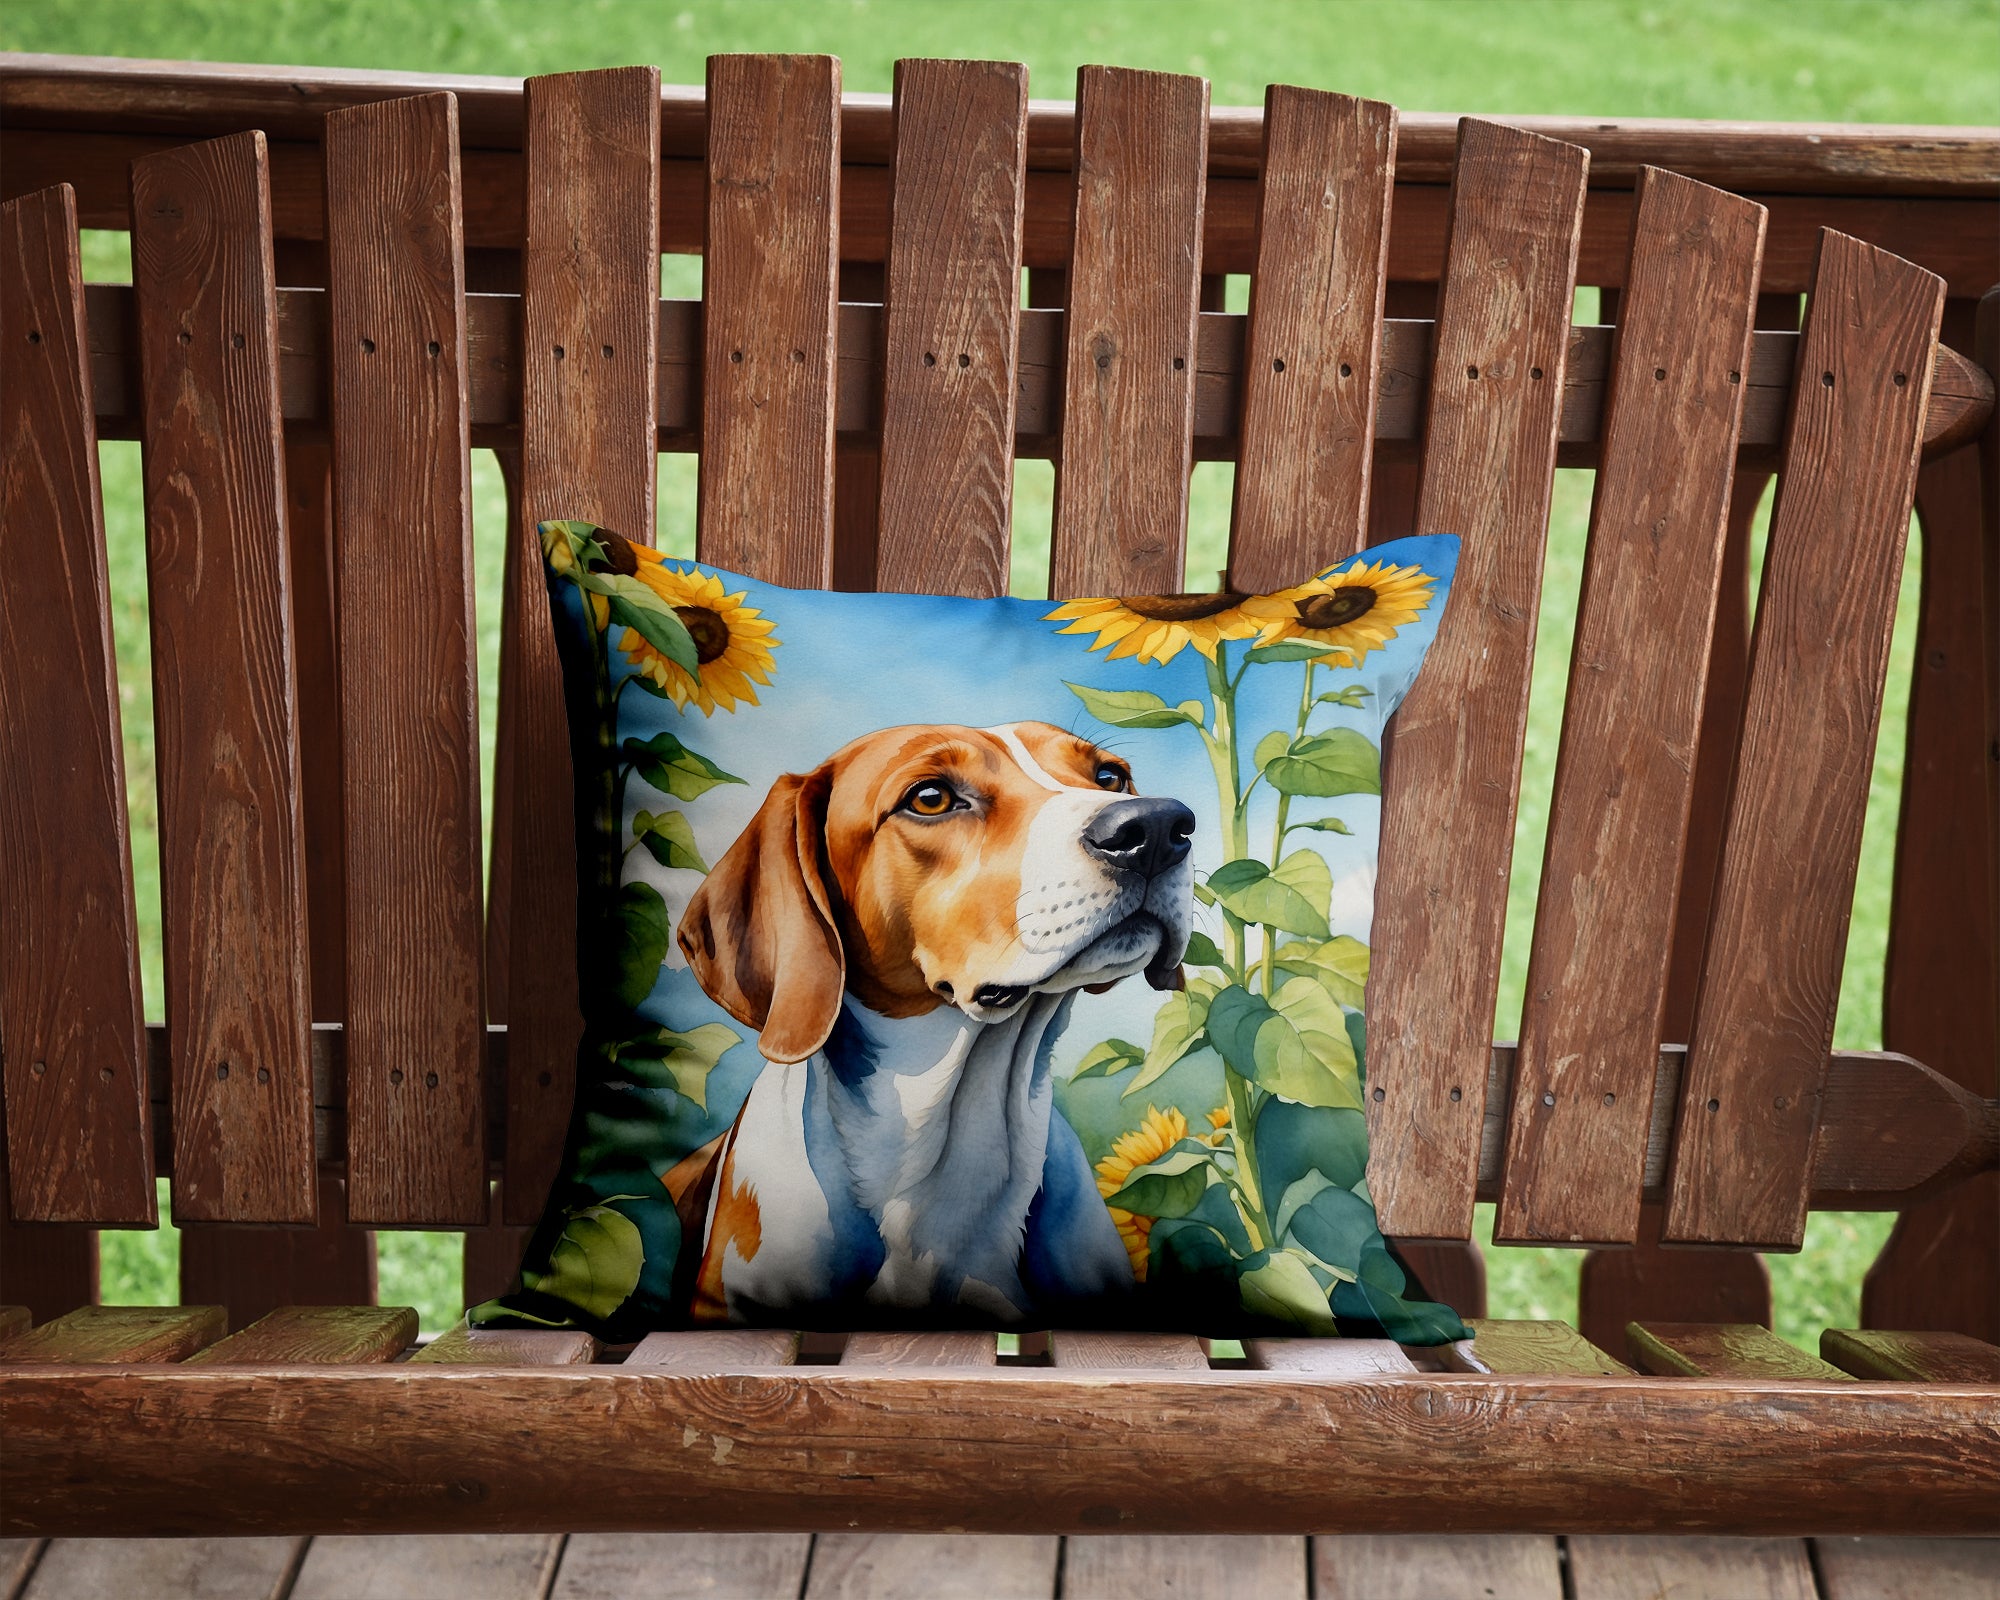 Buy this English Foxhound in Sunflowers Throw Pillow